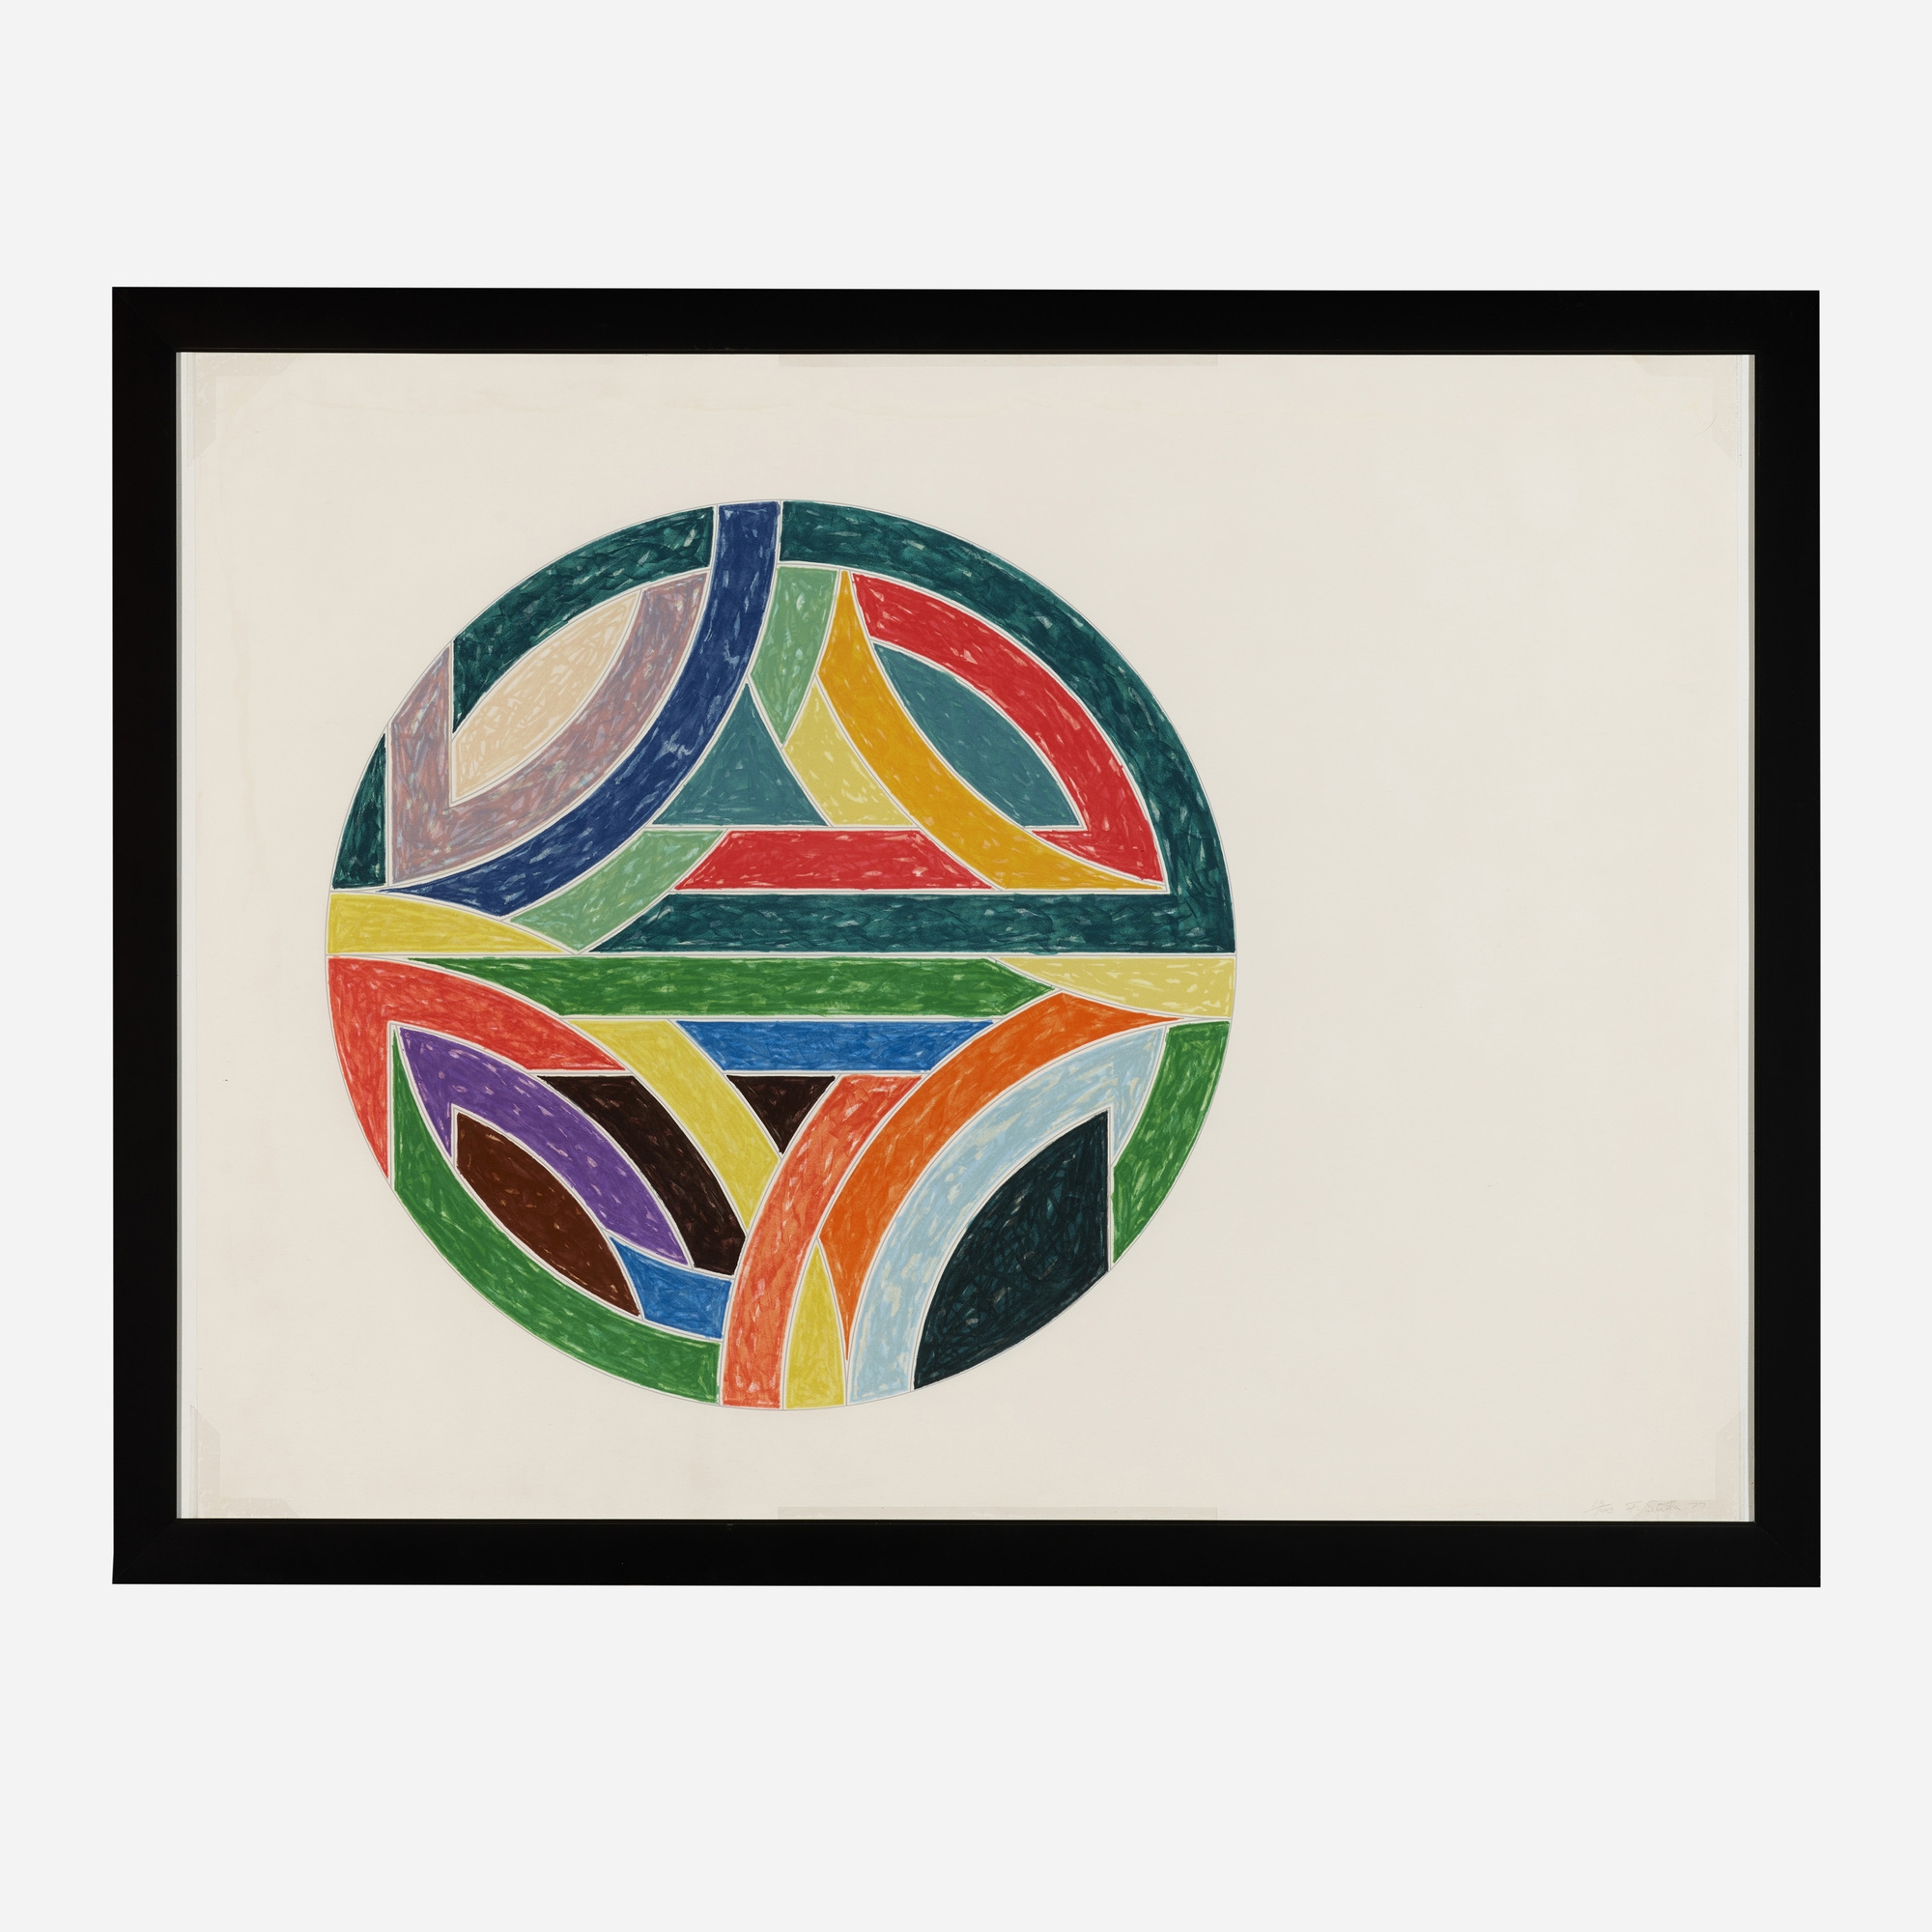 Artwork by Frank Stella, Sinjerli Variation IV, Made of offset lithograph and screenprint in colors on Arches